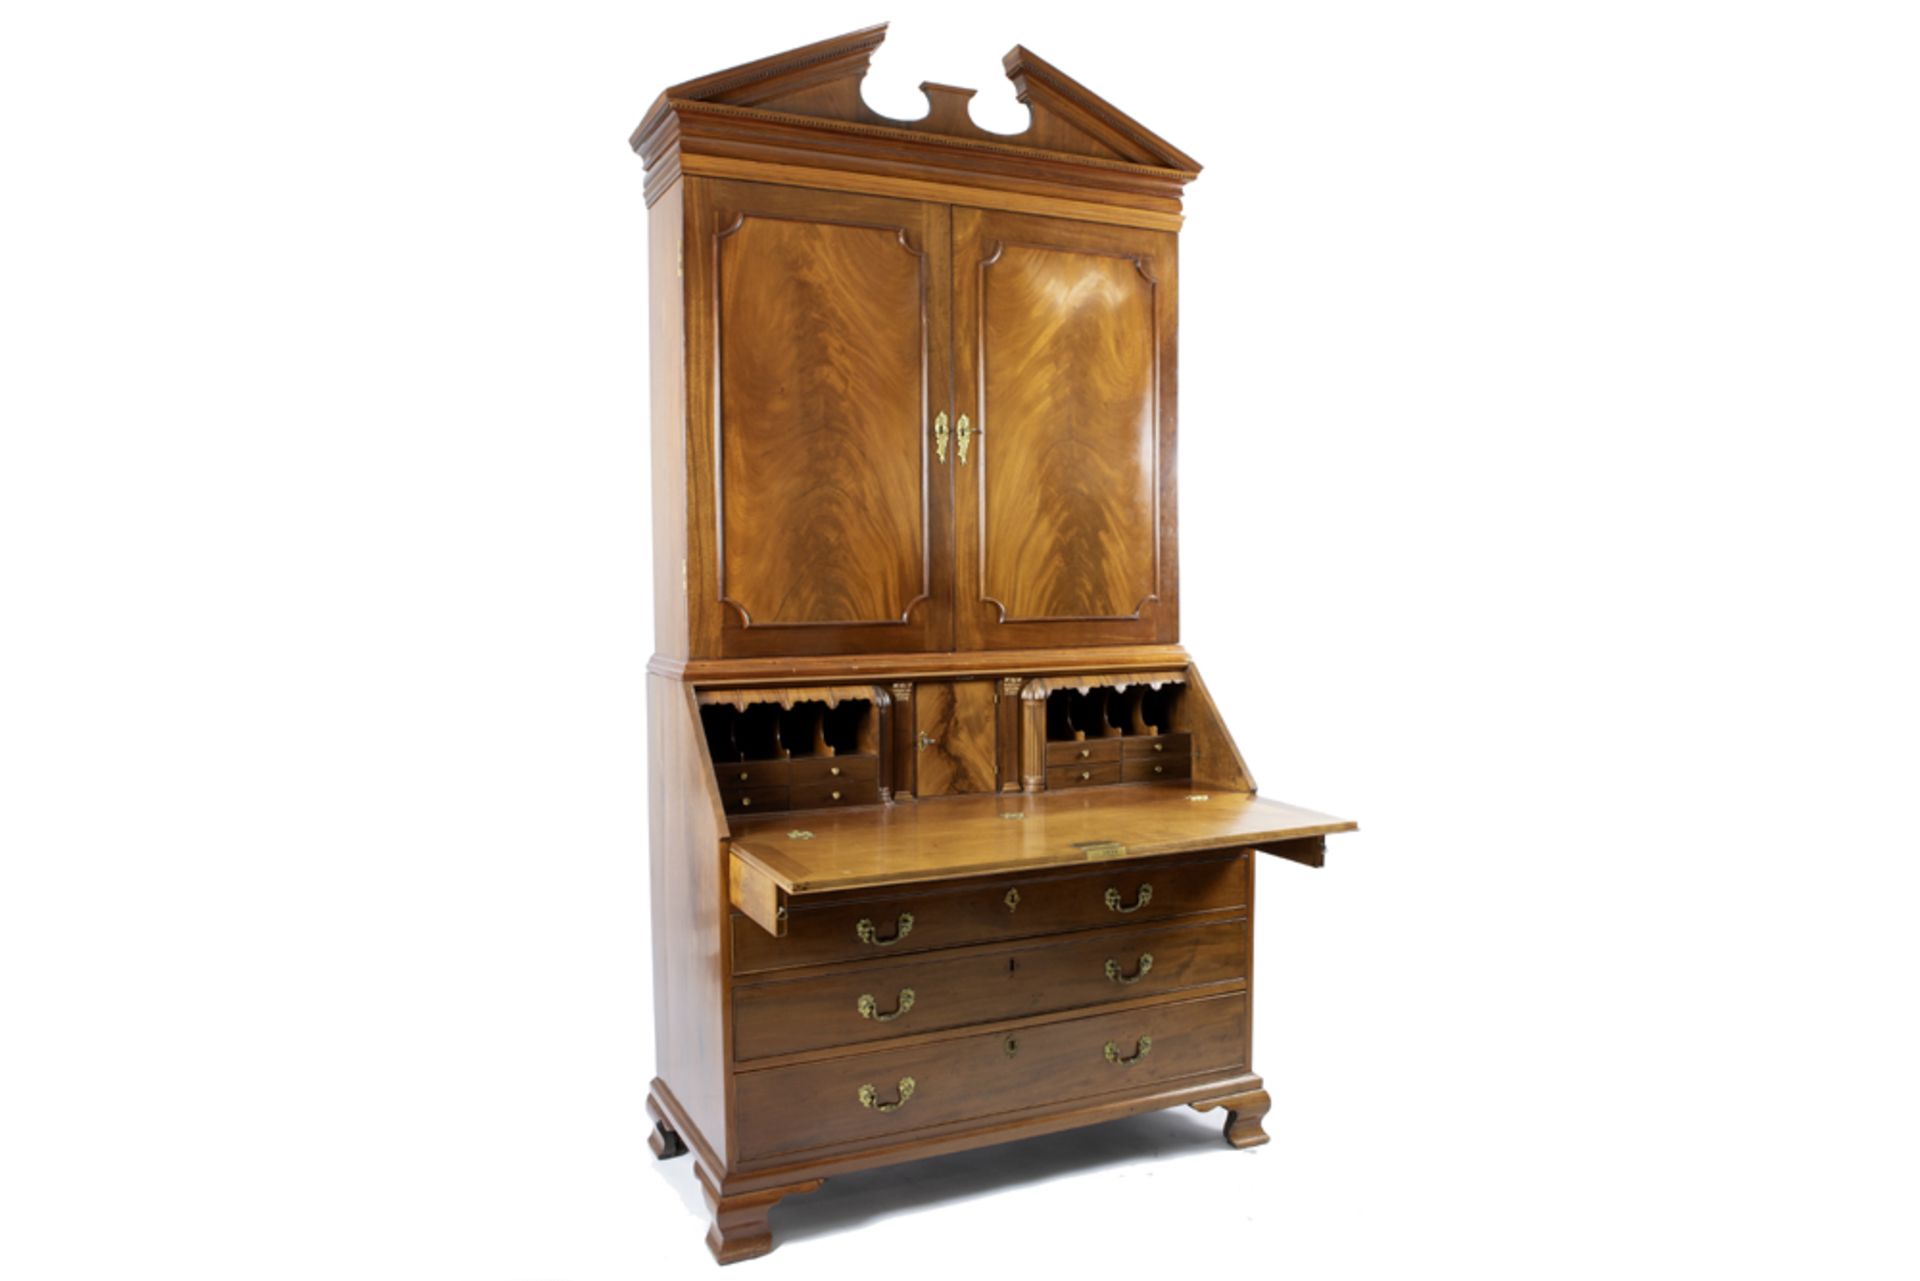 superb 18th Cent. English George III bureau bookcase in high quality mahogany bought in 1999 from - Image 5 of 6